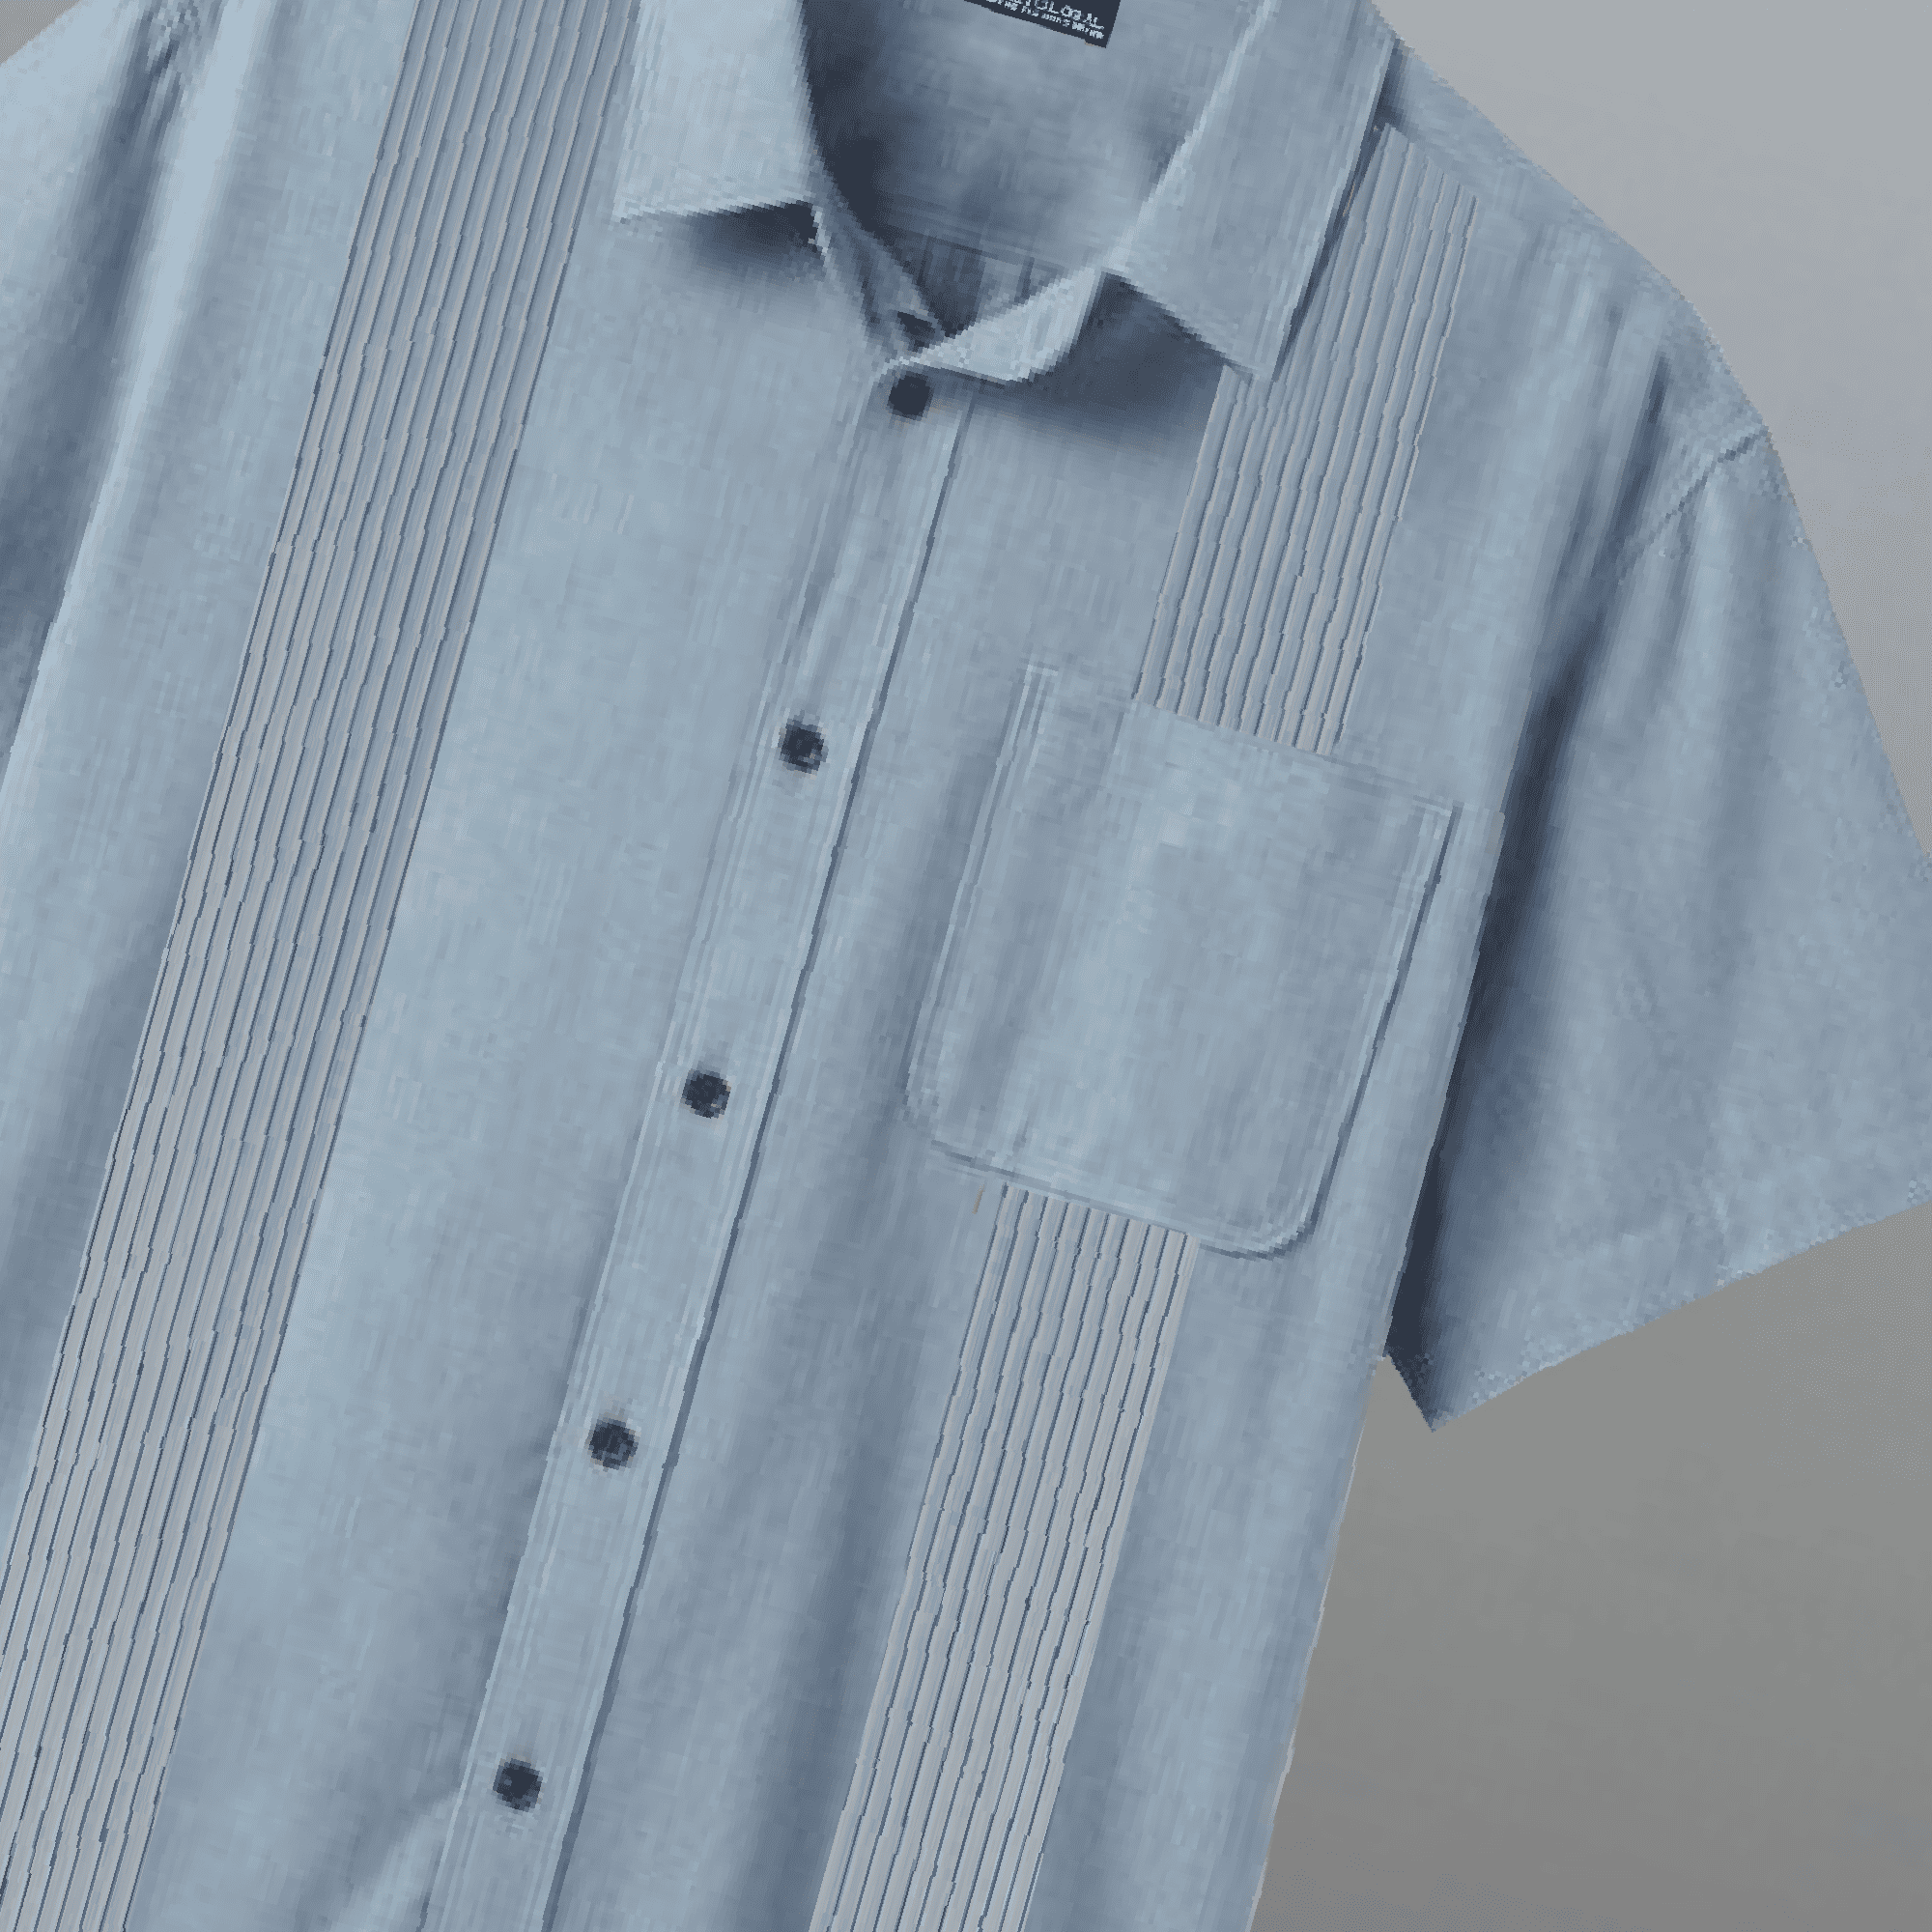 Men's Blue Half Sleeve Shirt with Pleated details and one side pocket-RMS042